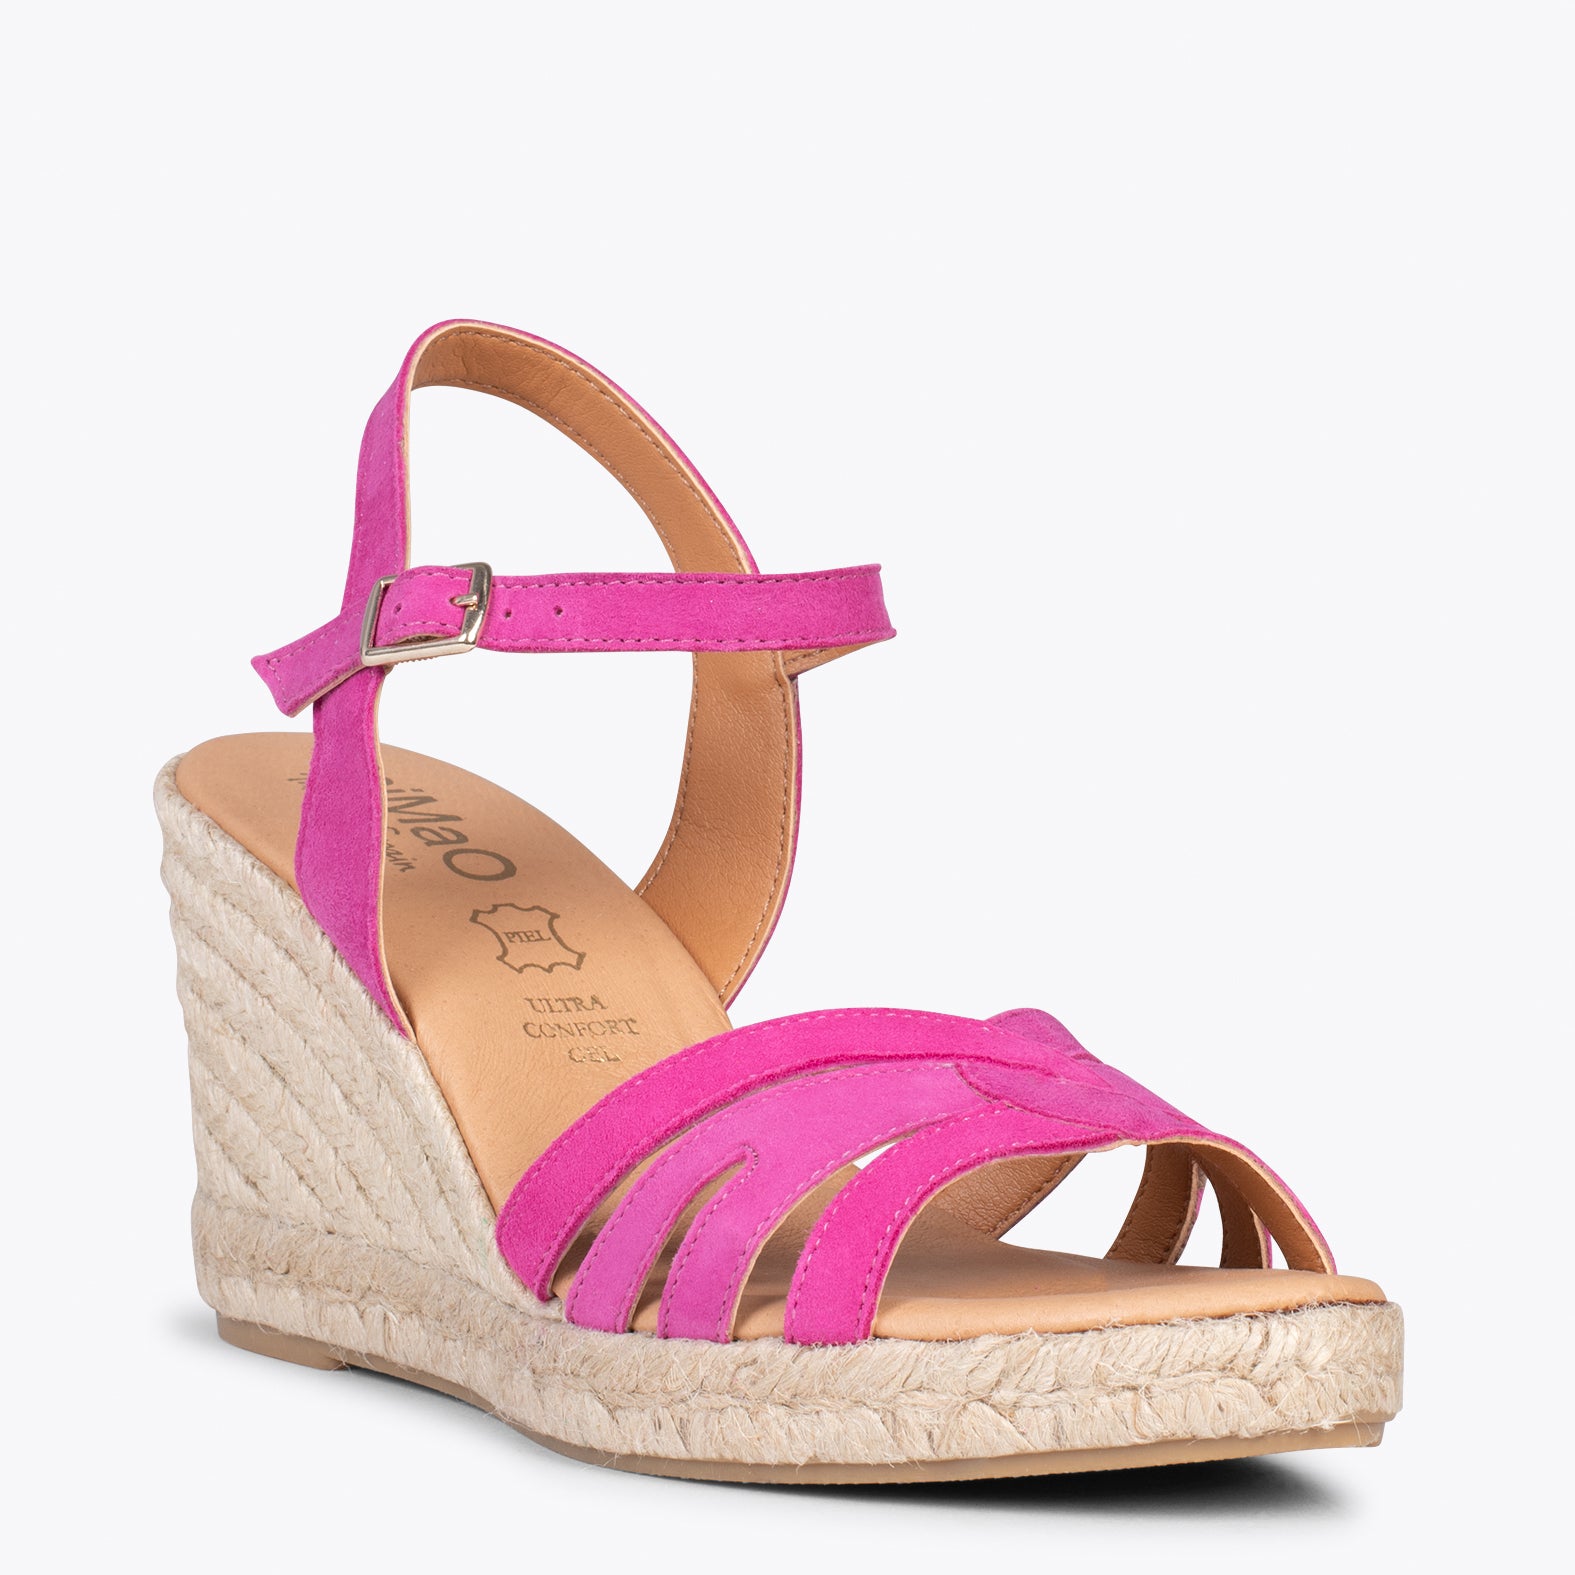 HOYAMBRE – FUCHSIA espadrilles with braided front